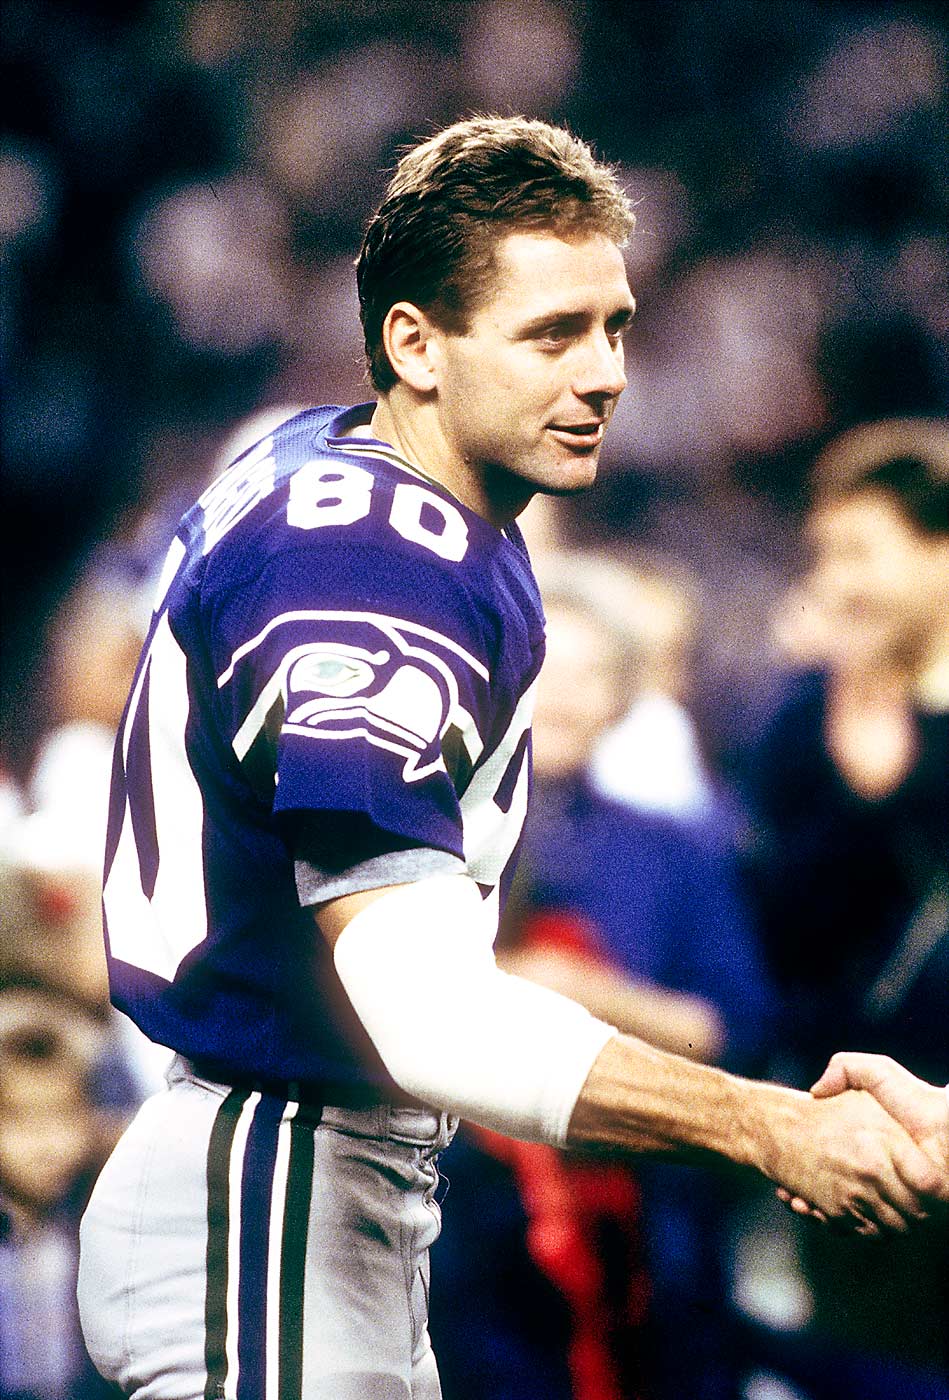 Seattle Seahawks Hall of Fame wide receiver Steve Largent (80), during a celebration after his final game in Seattle, Wash., on December 23, 1989, in The Kingdome. (Courtesy Seattle Seahawks)